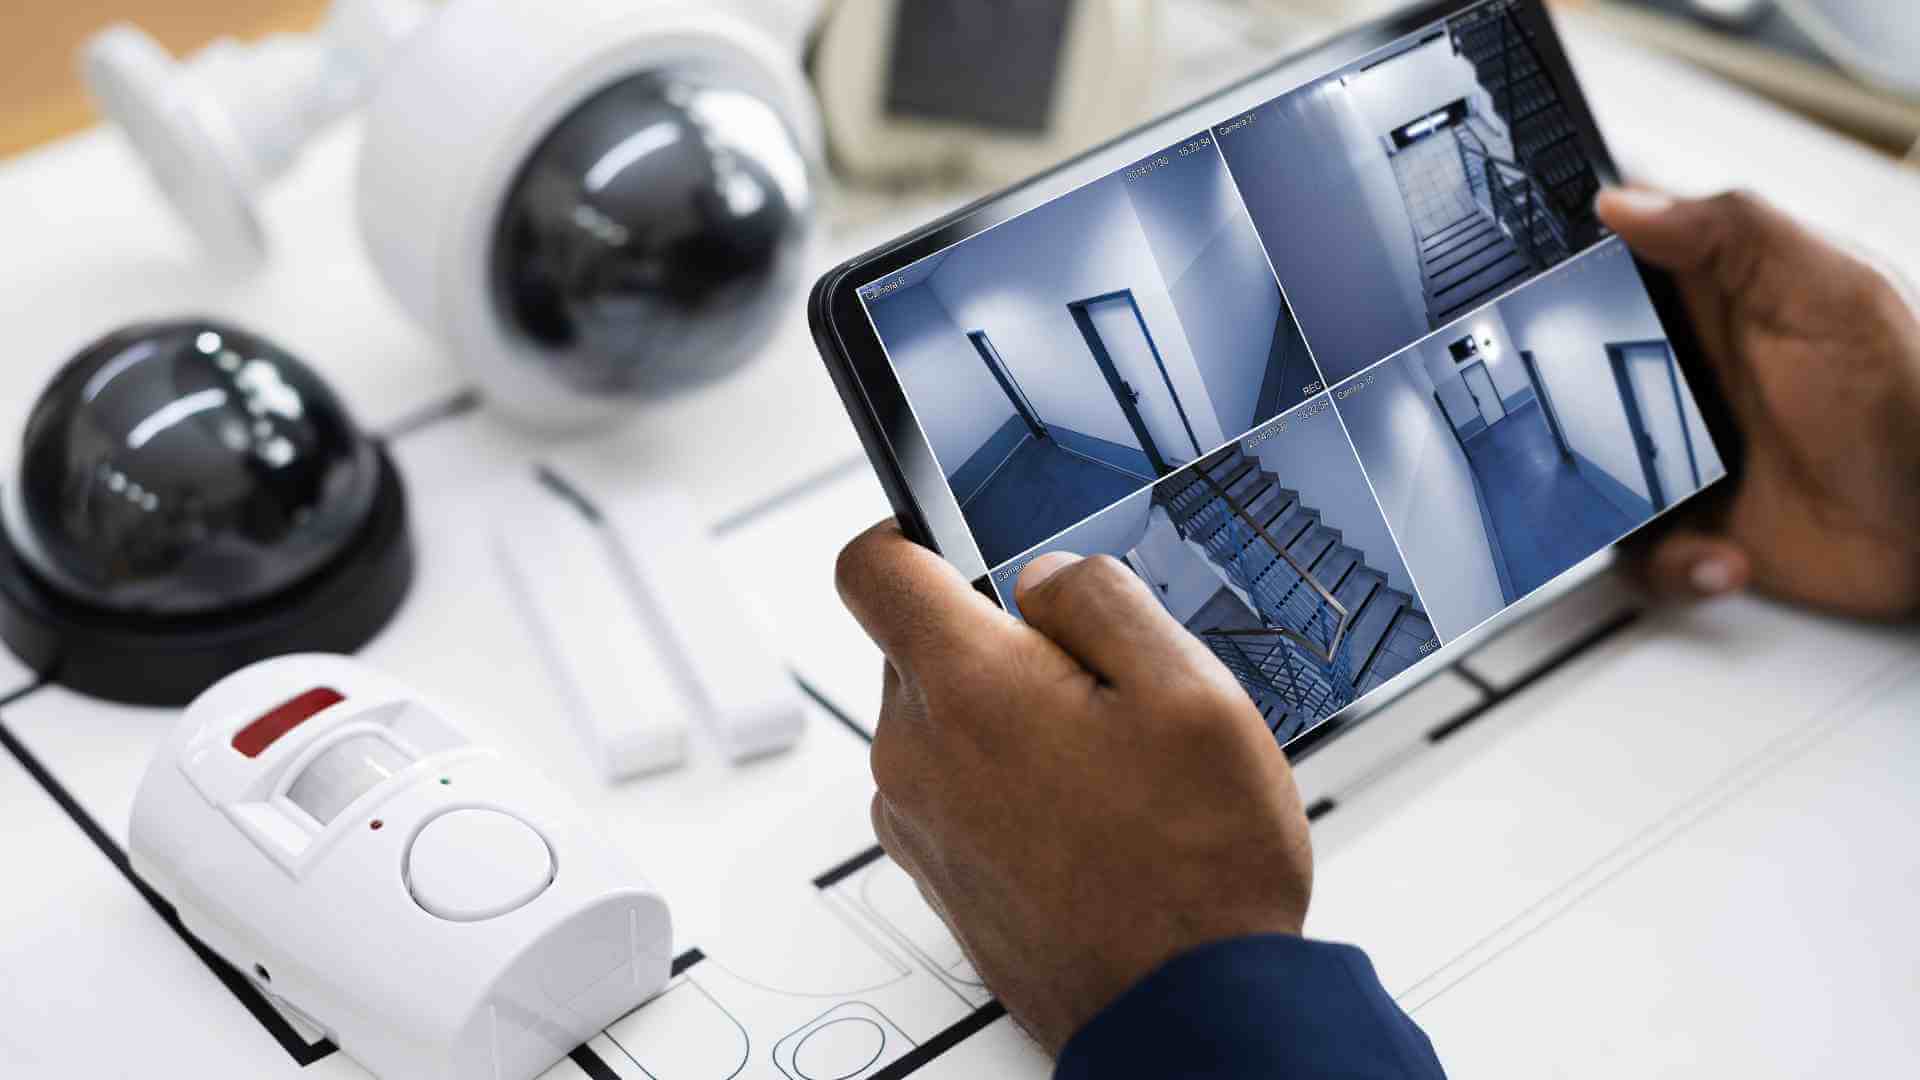 Smart Home Device Security Best Practices